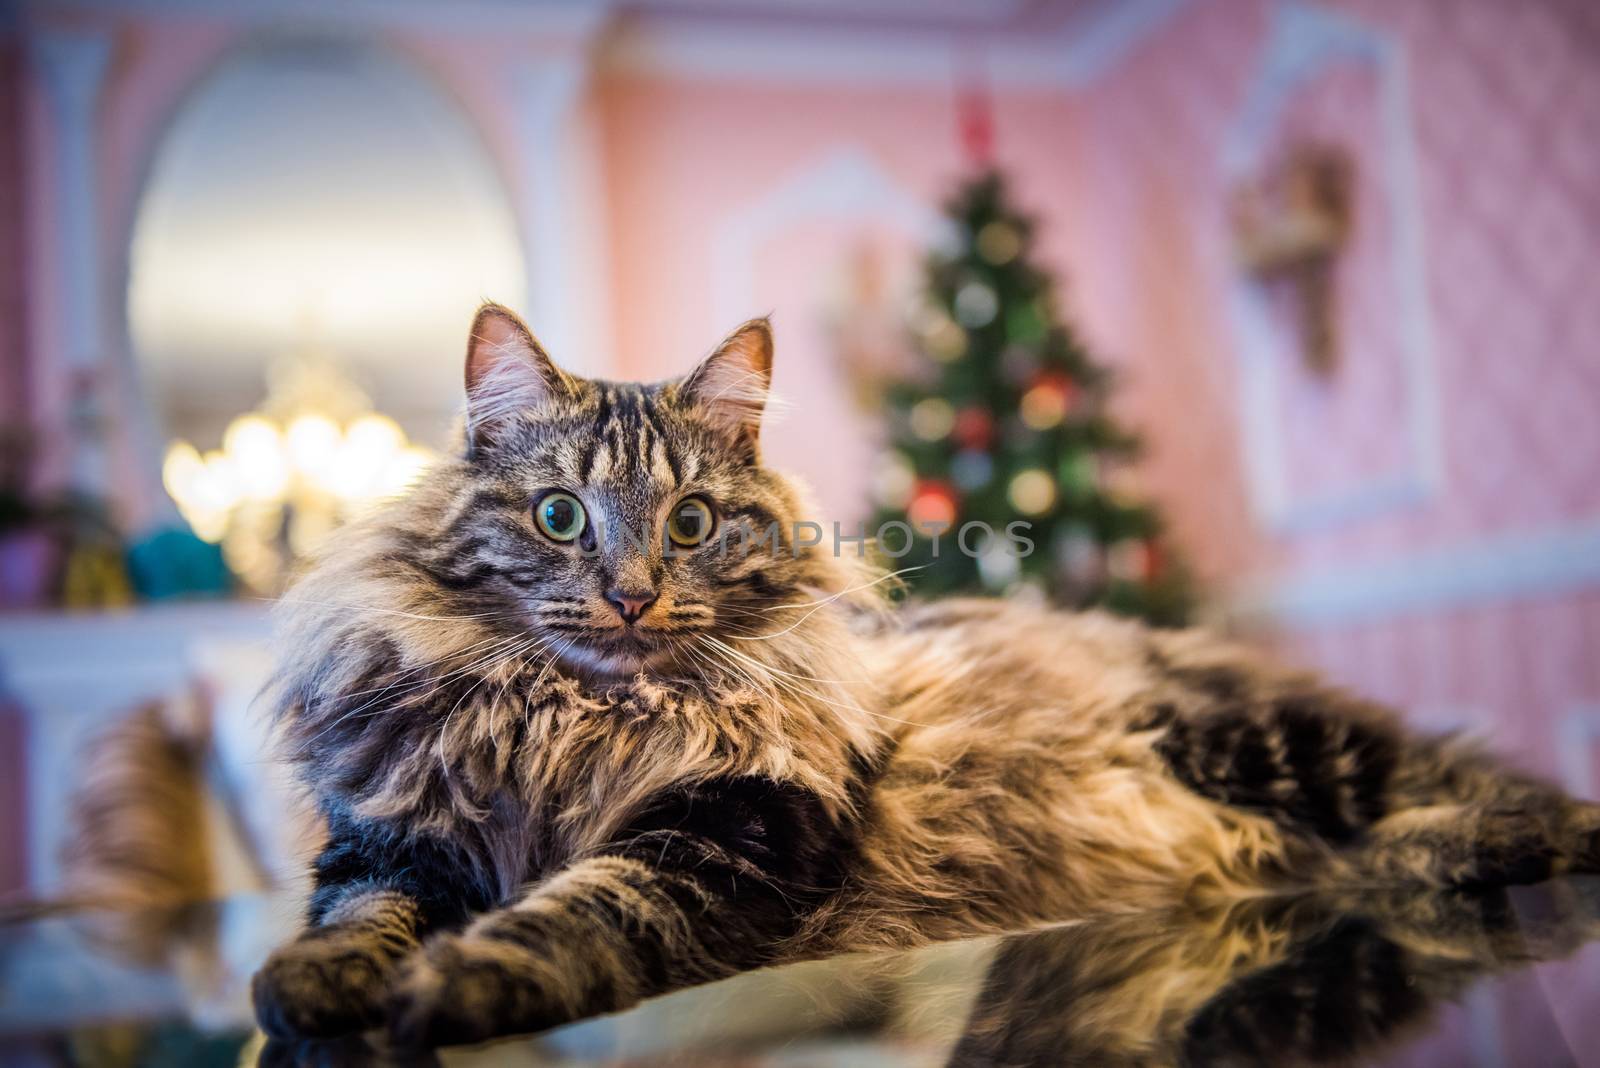 Norwegian forest cat inside interior house on Christmas by infinityyy